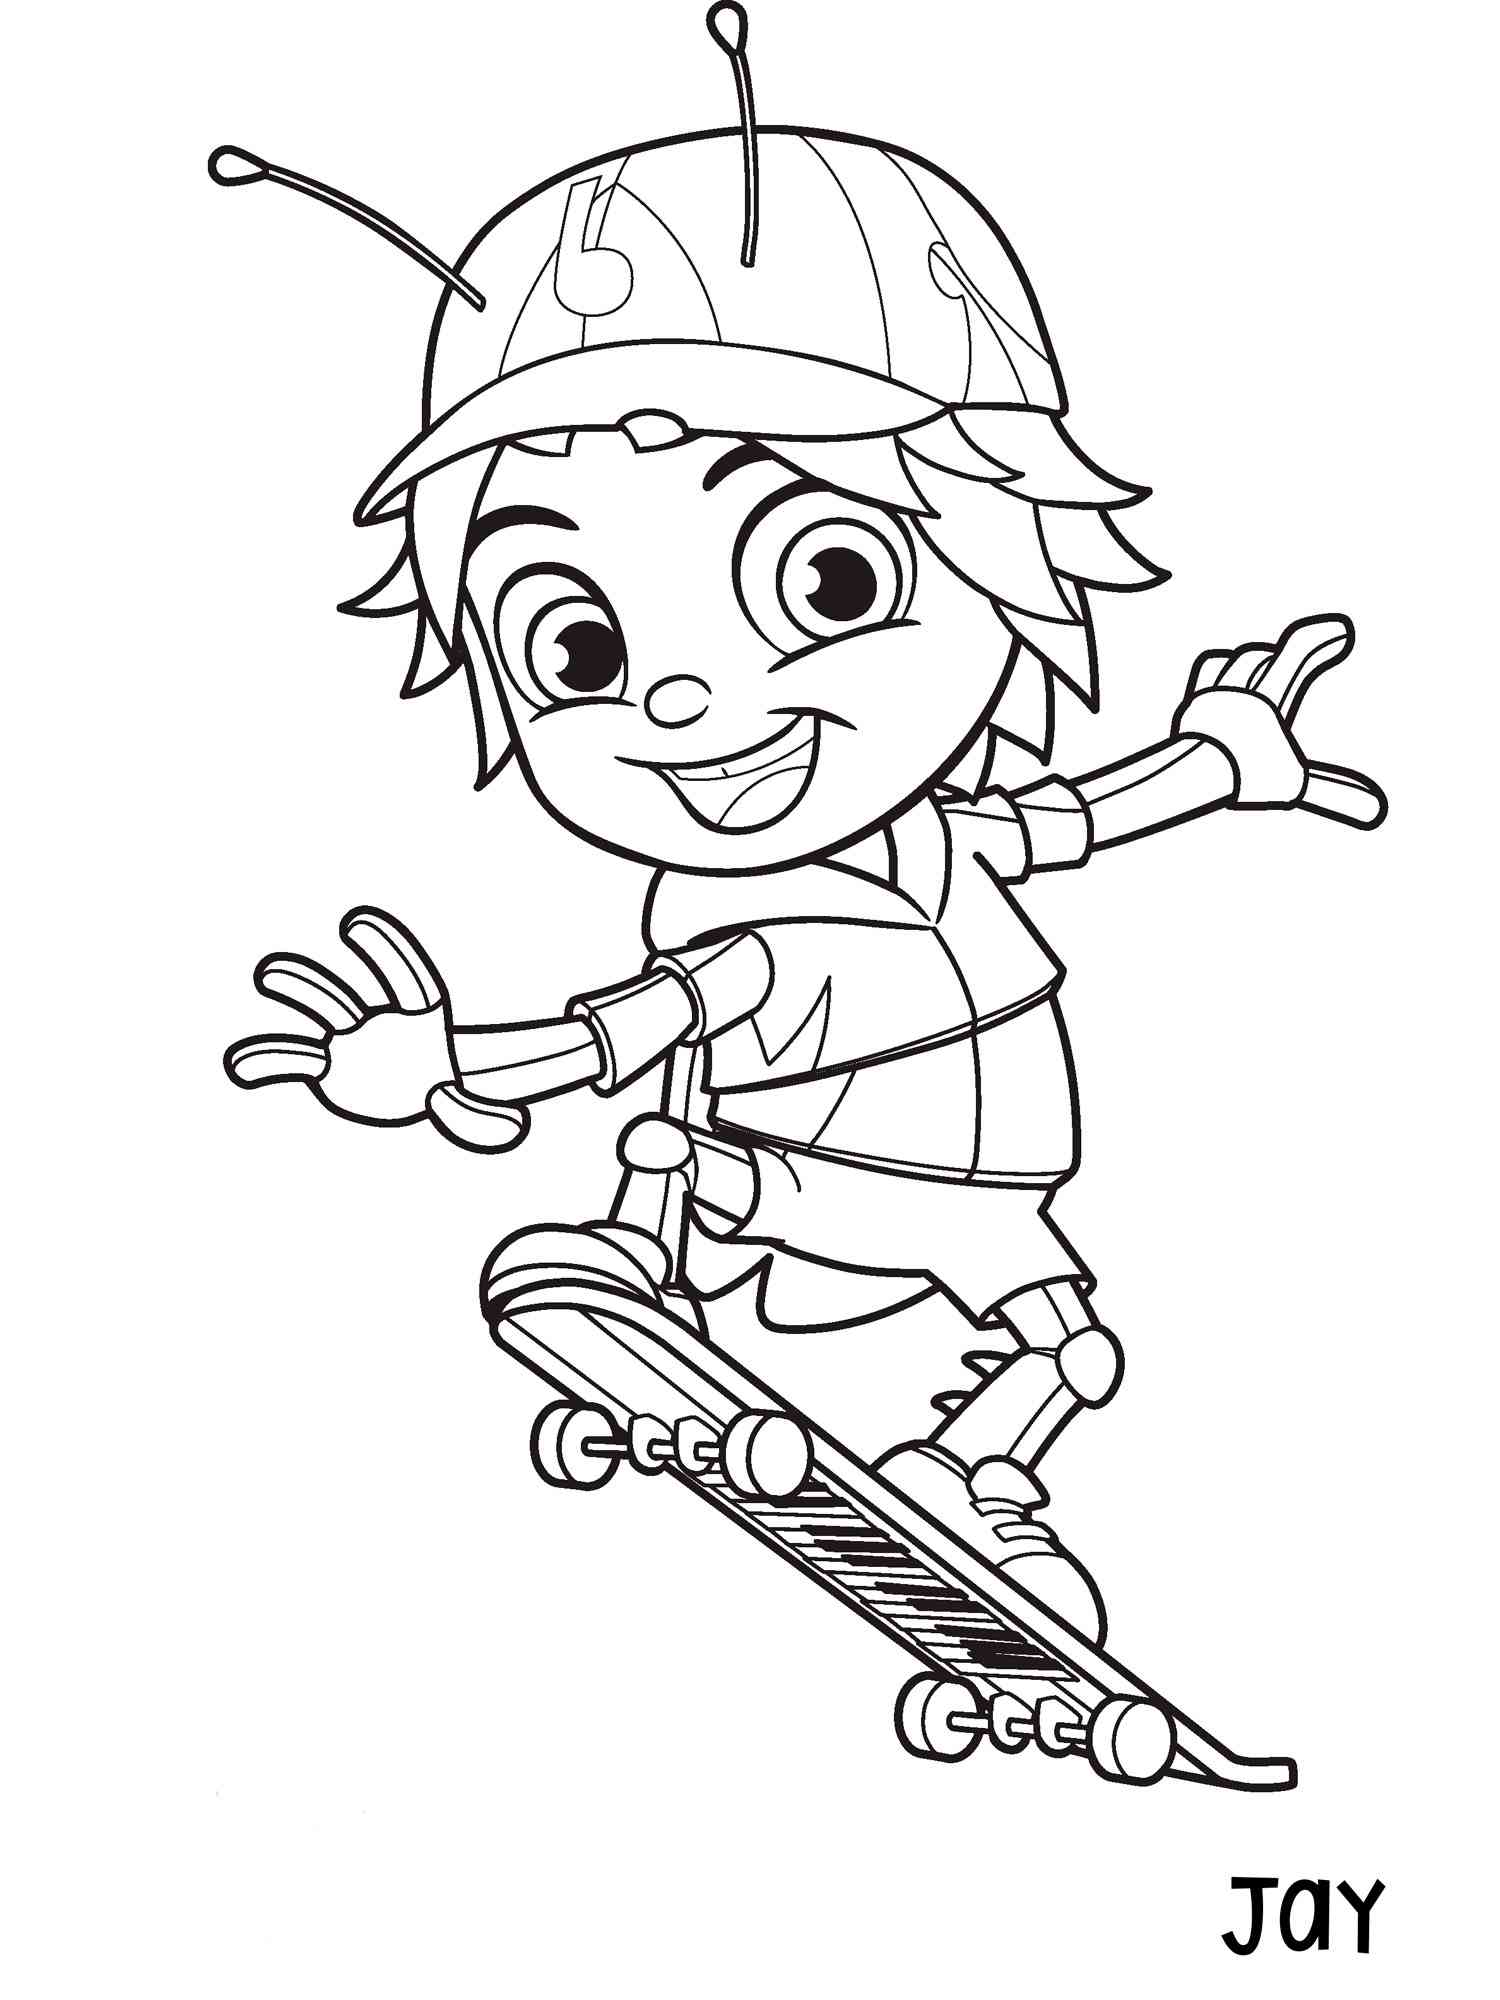 Jay skateboarding from Beat Bugs coloring page